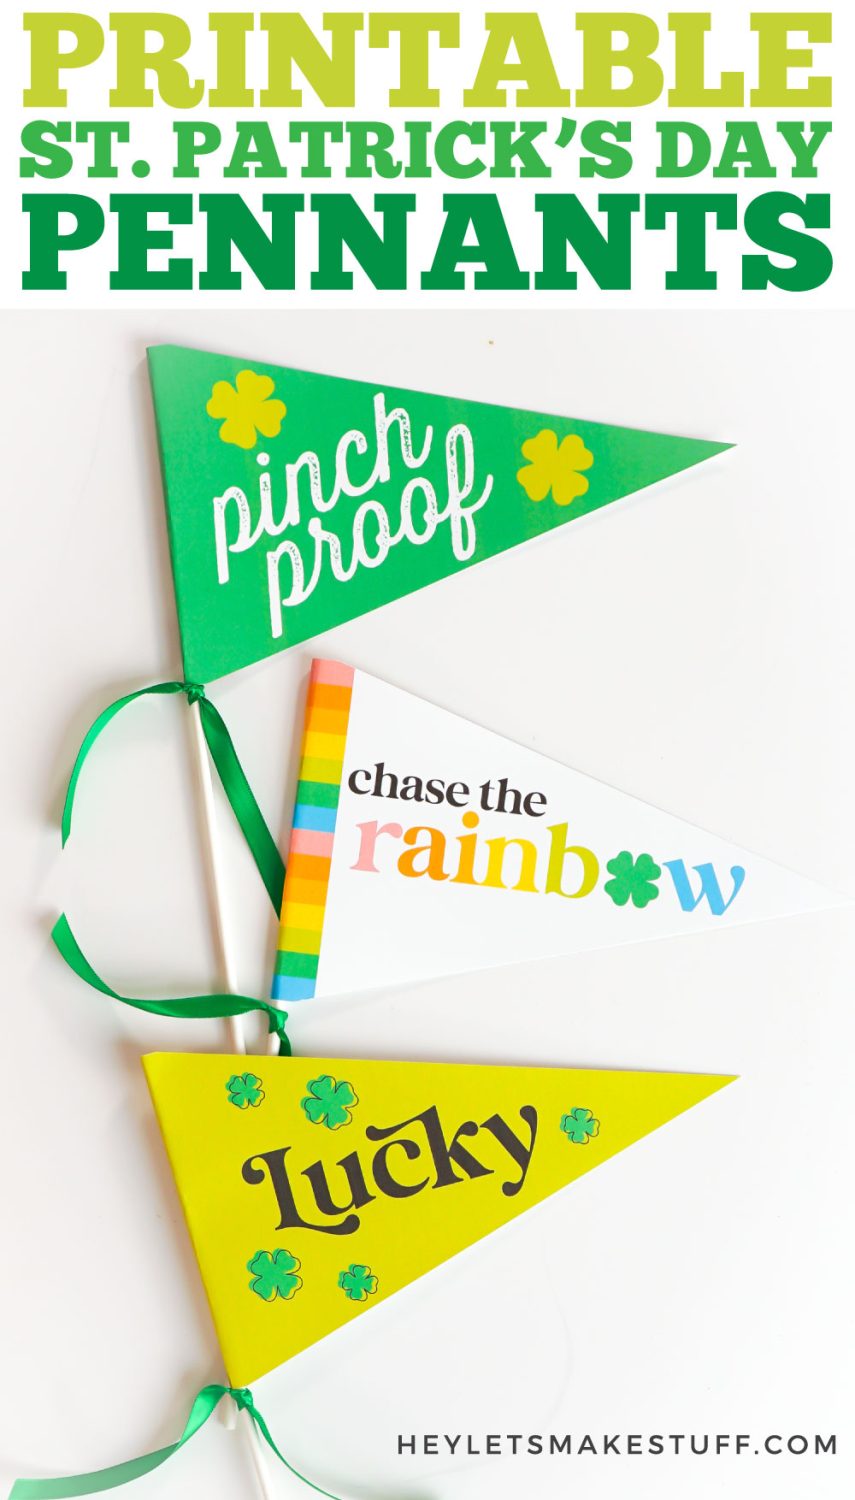 St. Patrick's Day pennant flags pin image